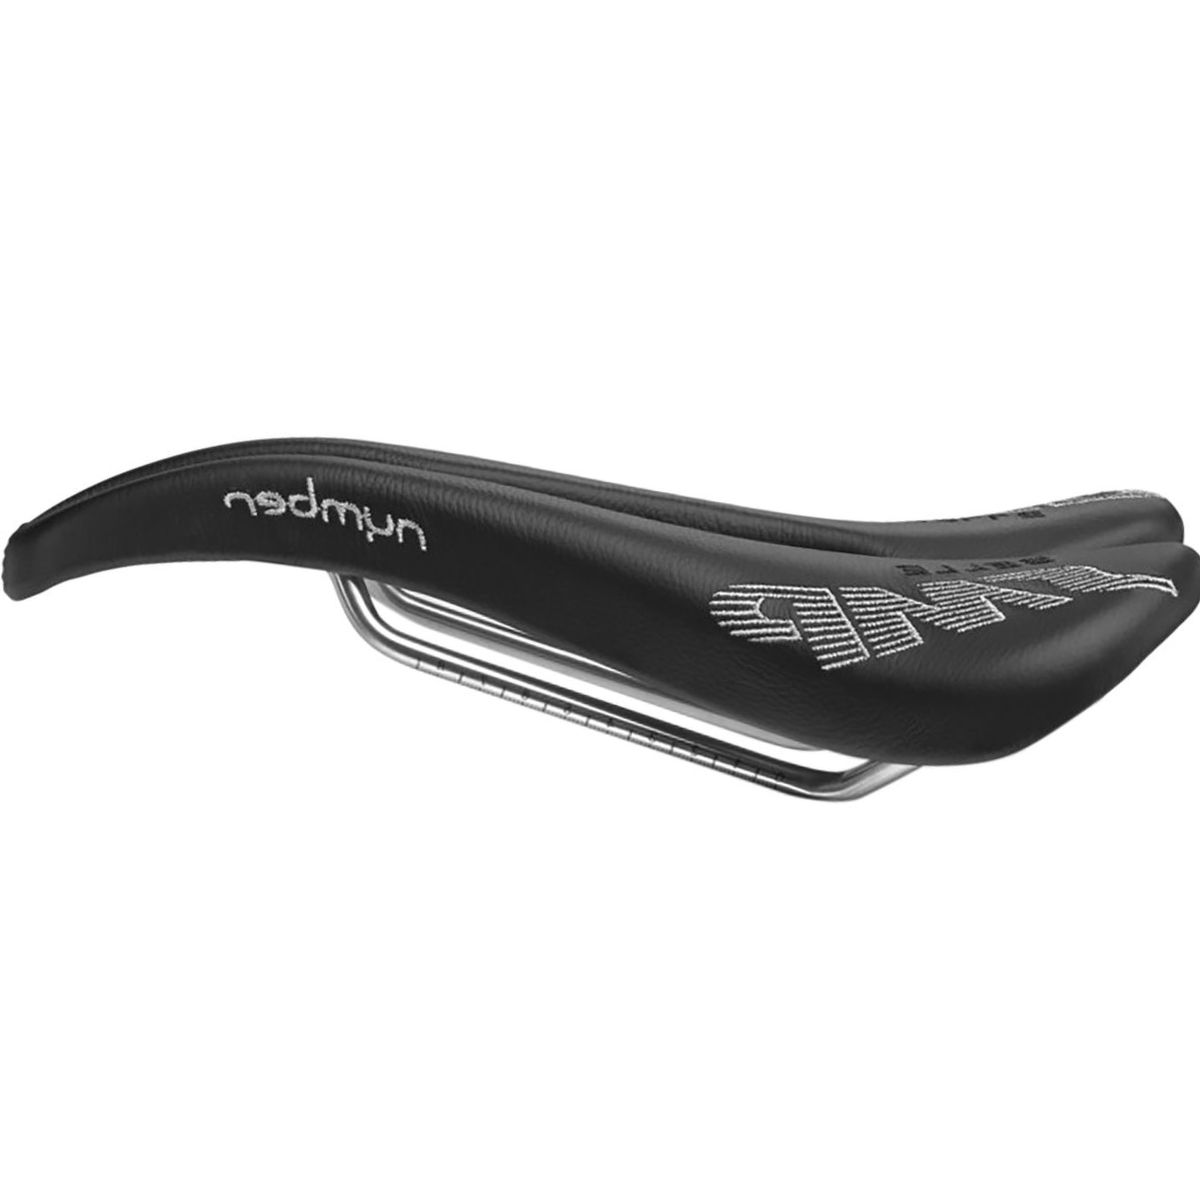 Selle SMP Nymber Carbon Saddle - Men's